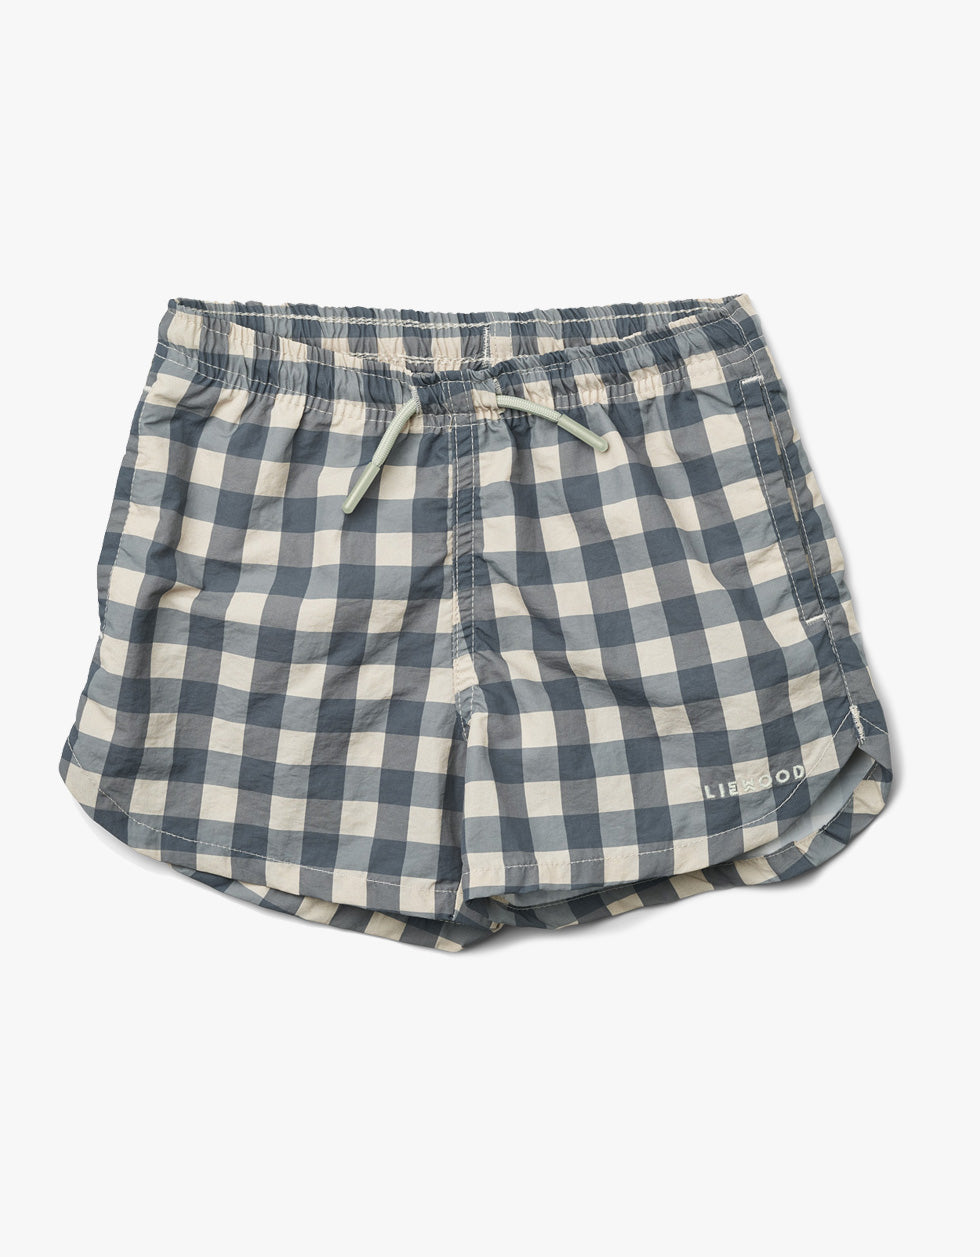 Aiden Board Shorts - Check: Whale Blue Multi Mix